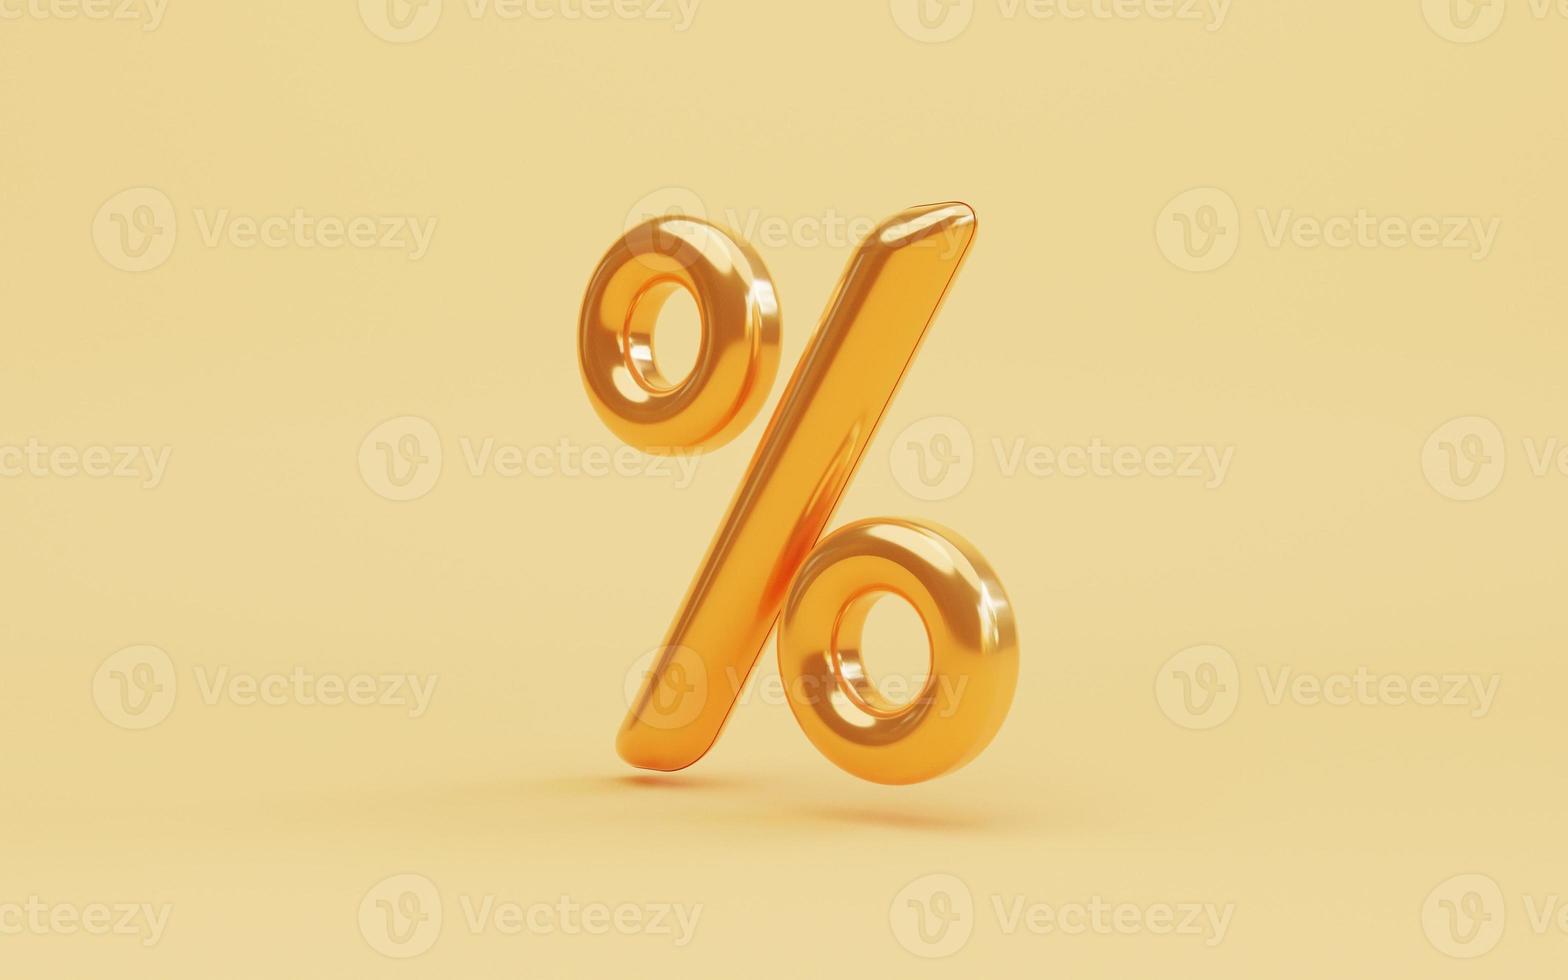 Golden percentage sign symbol on yellow for discount, sale promotion concept by 3d render. photo